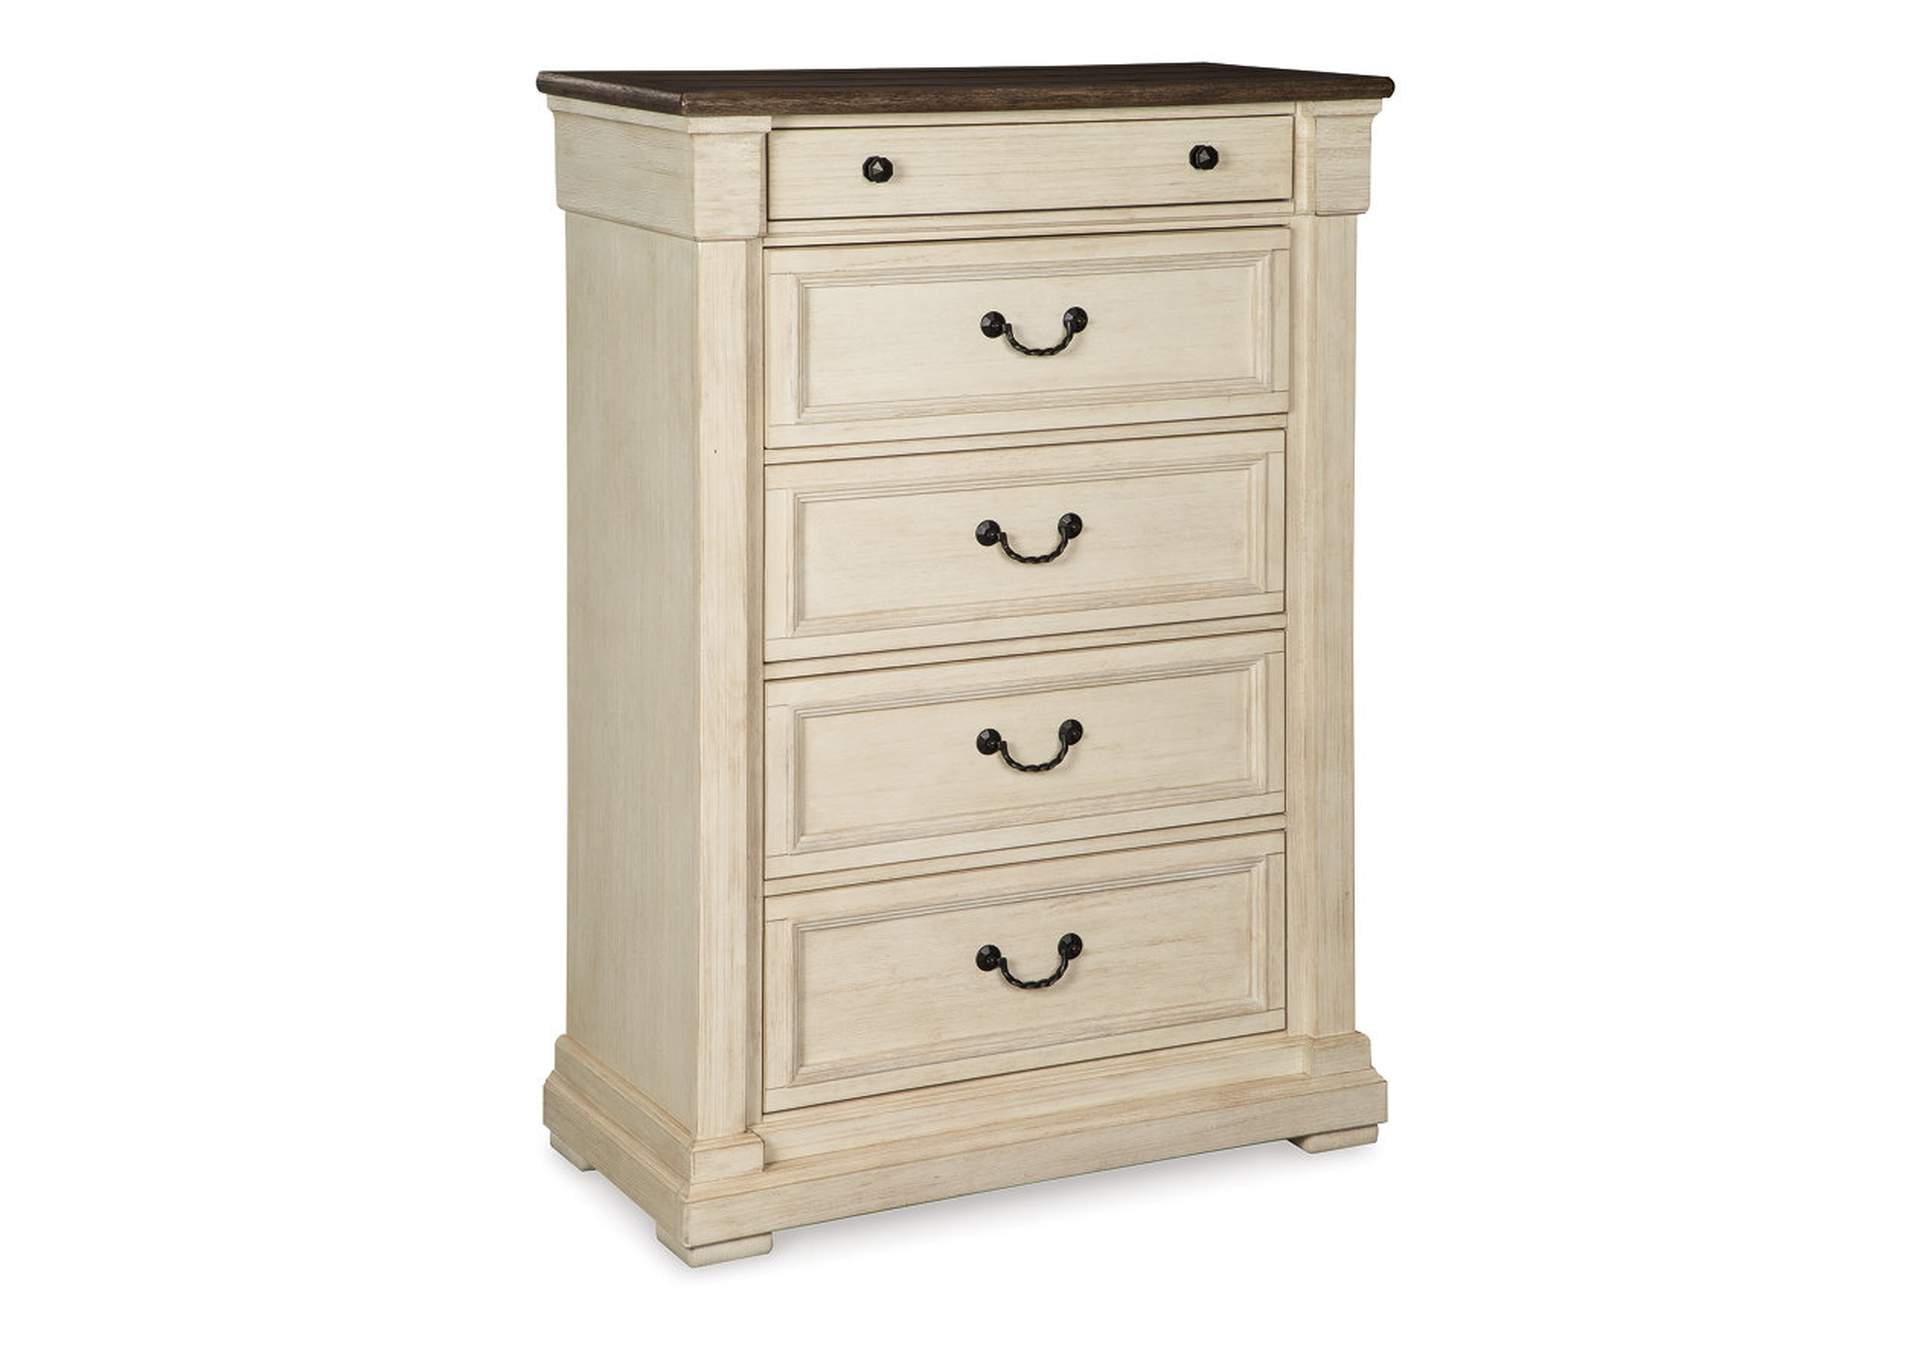 Bolanburg Chest of Drawers,Signature Design By Ashley